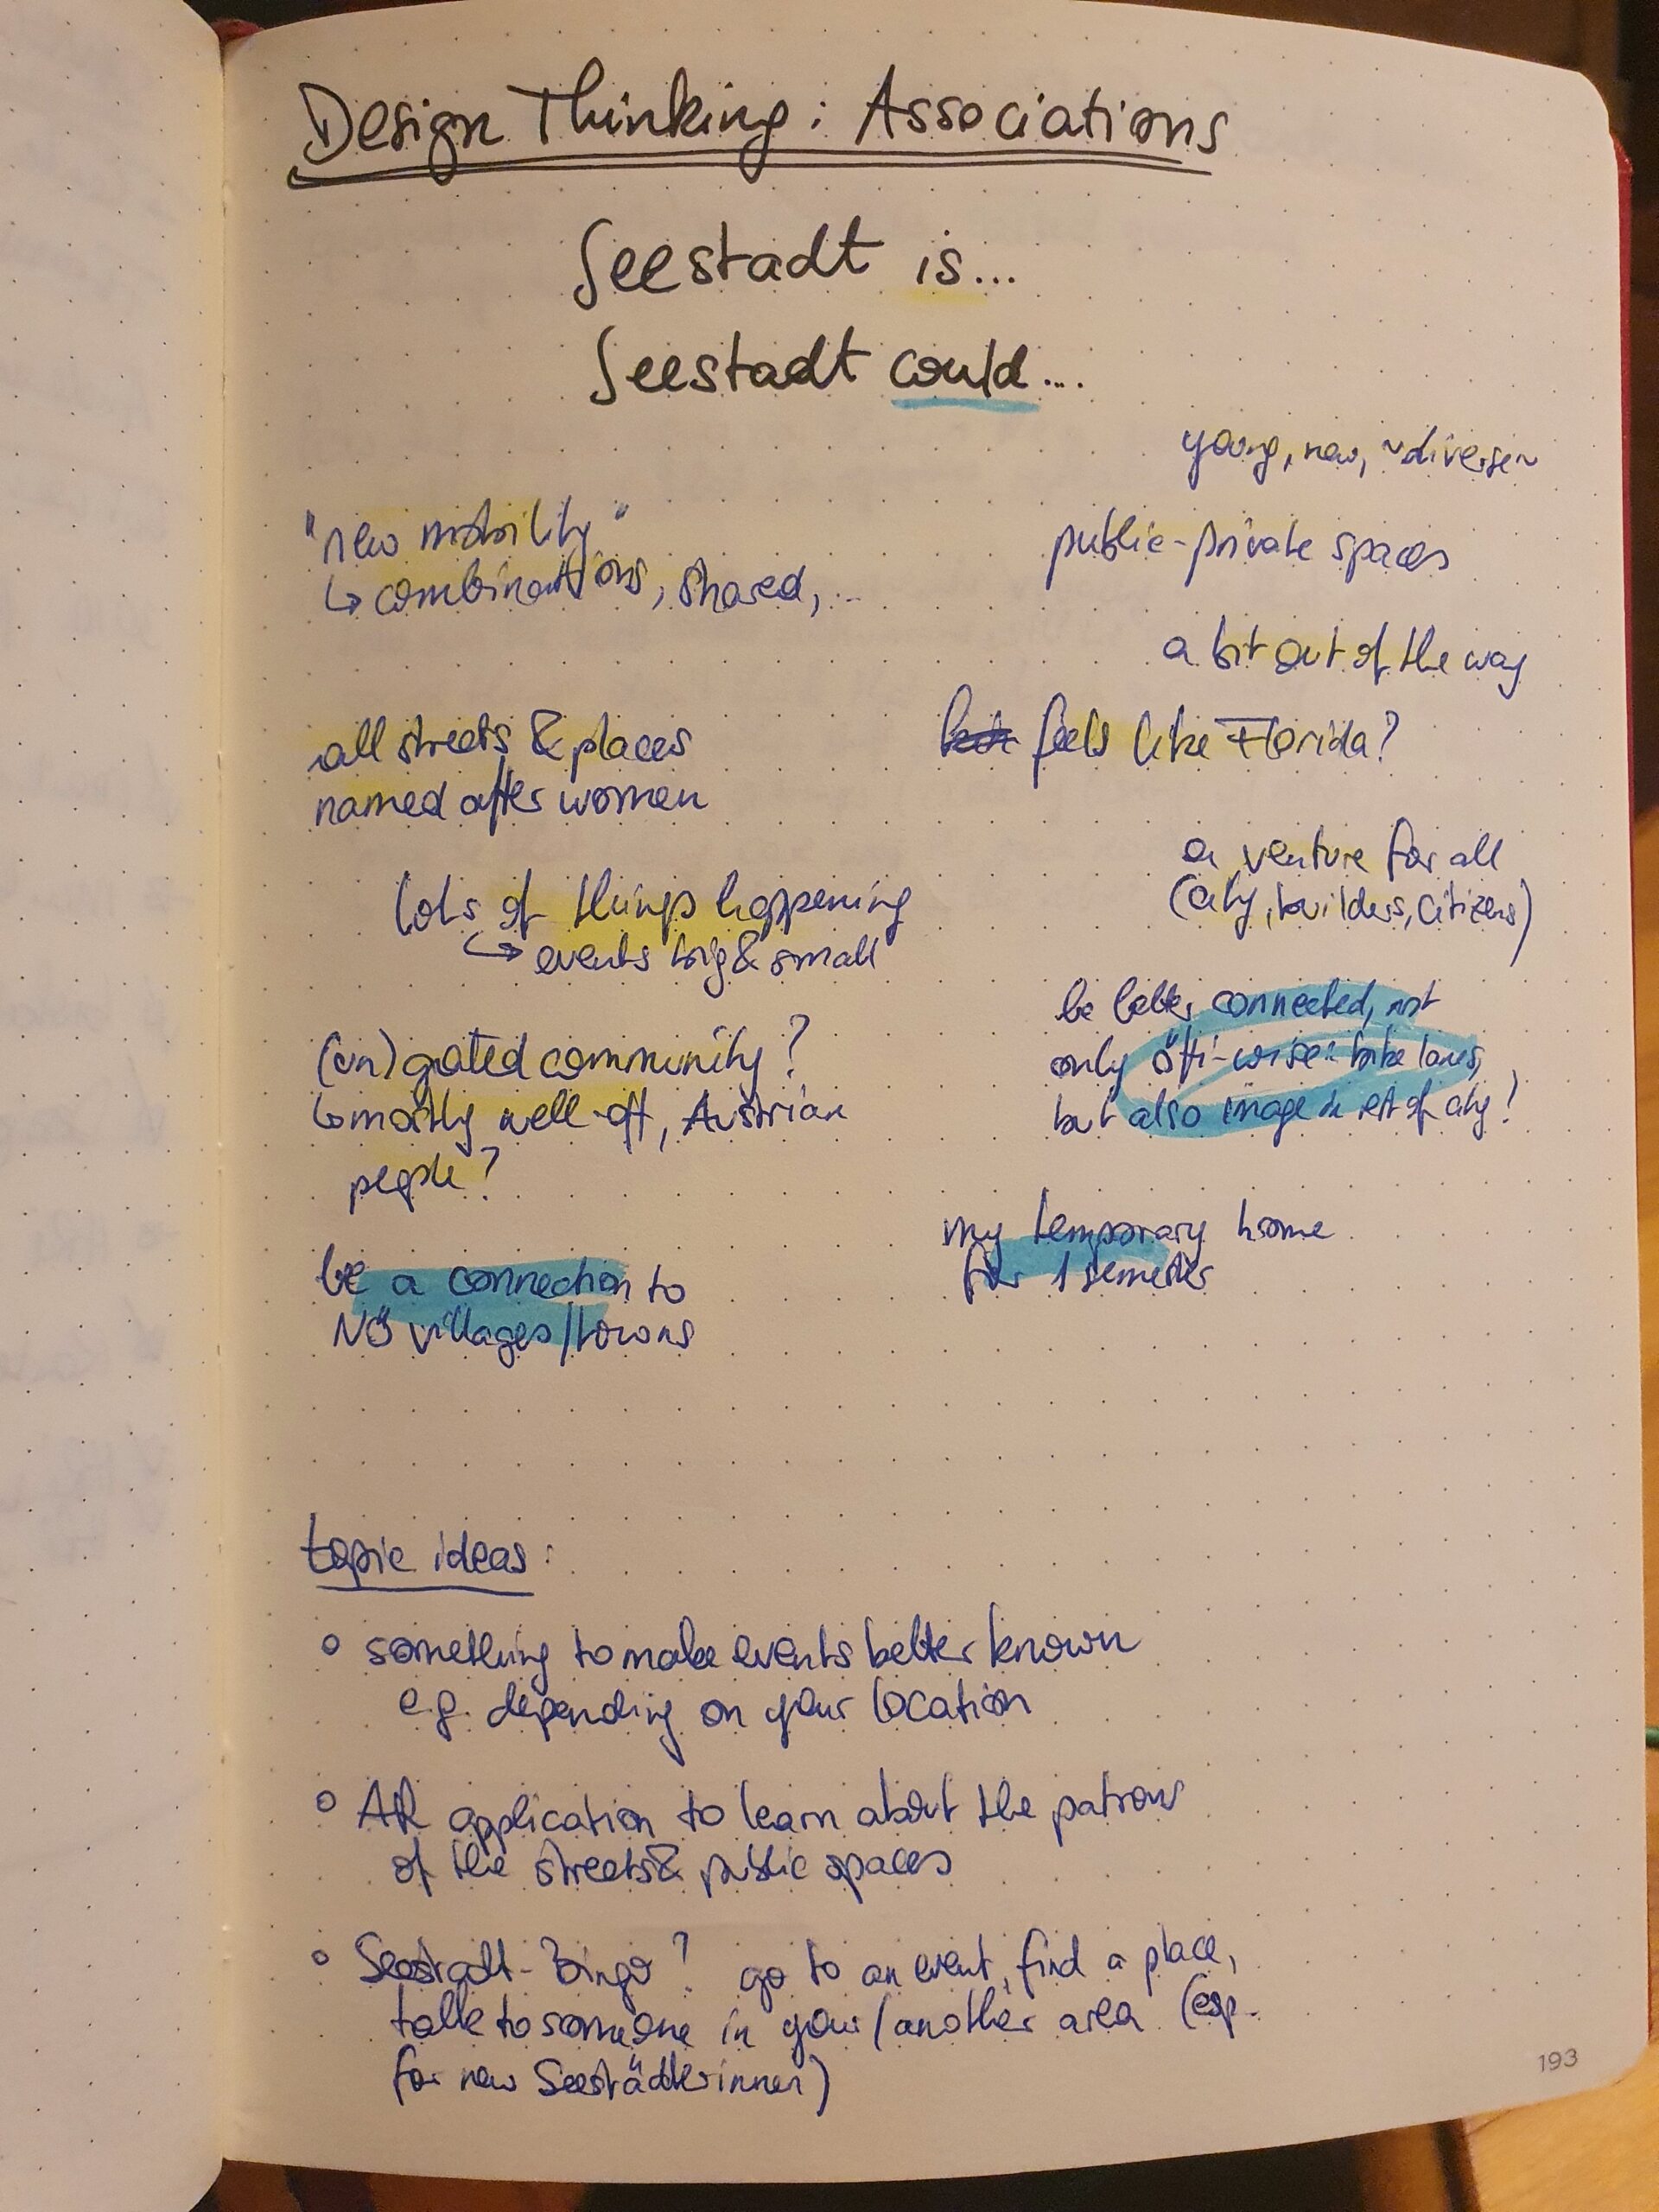 A handwritten word cloud of associations titled "Seestadt is ..., Seestadt could ...". Associations are color coded in blue and yellow, followed by a list of three topic ideas.